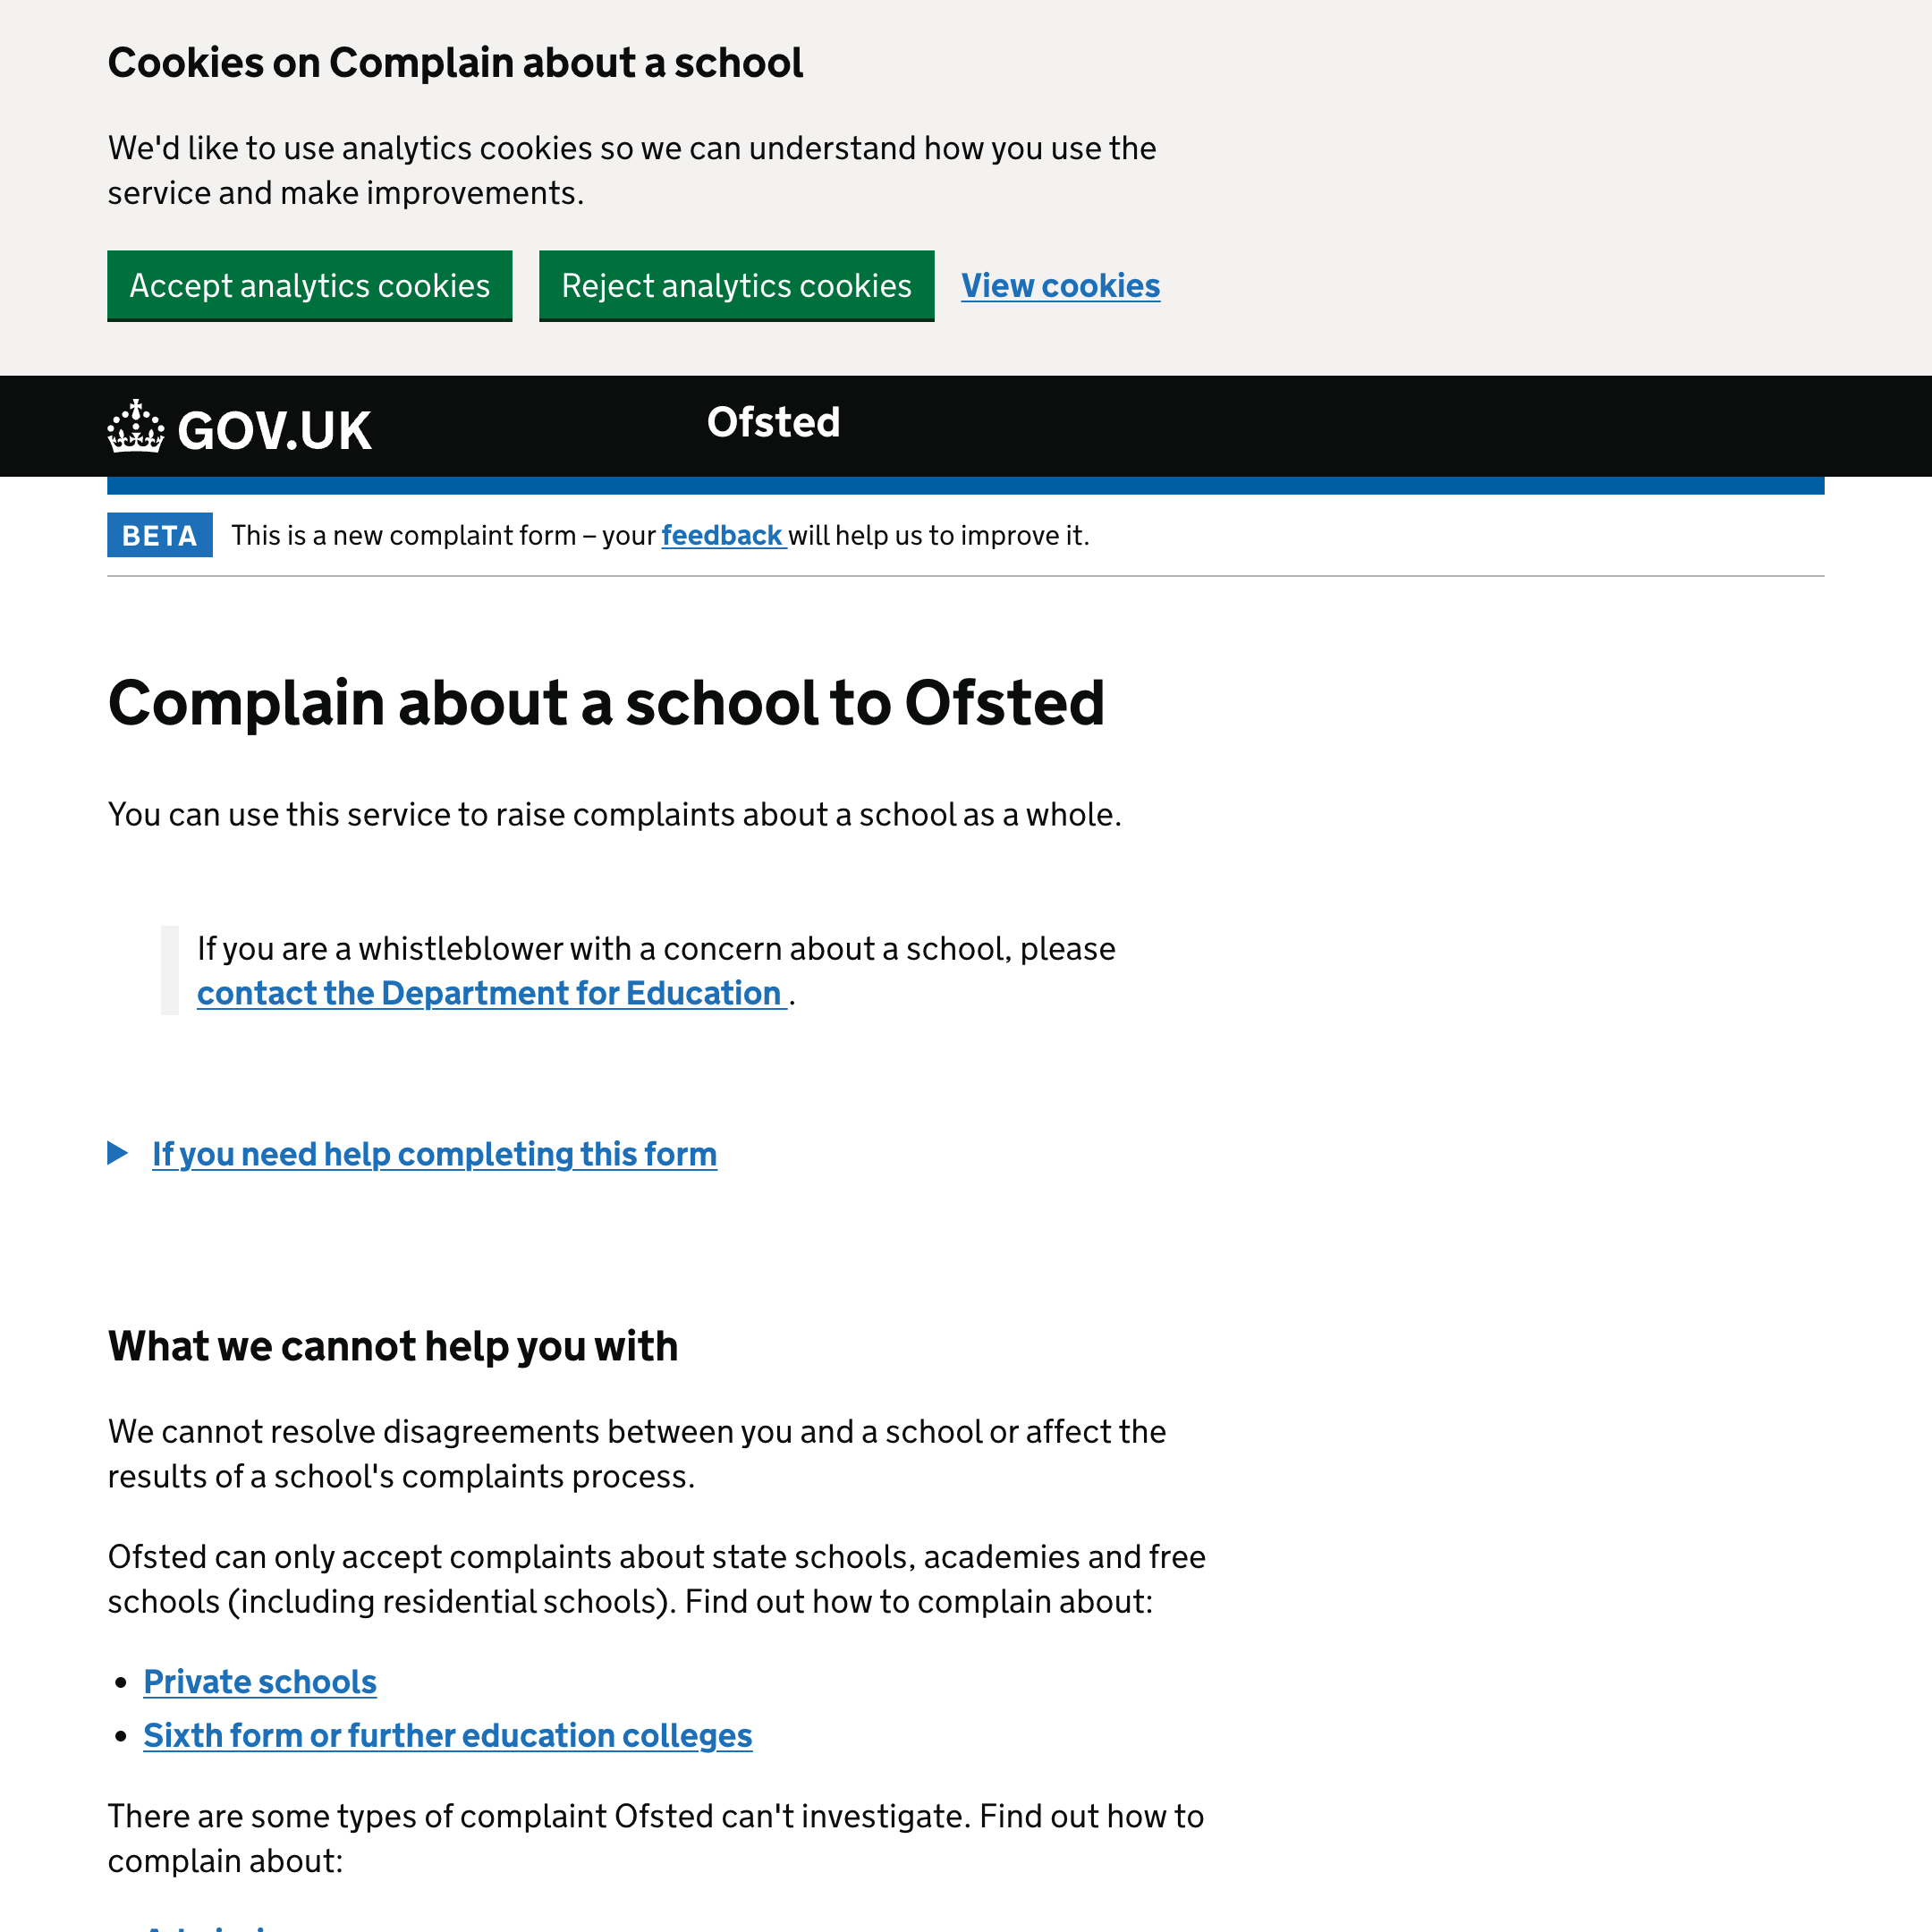 Complain about a state school to Ofsted